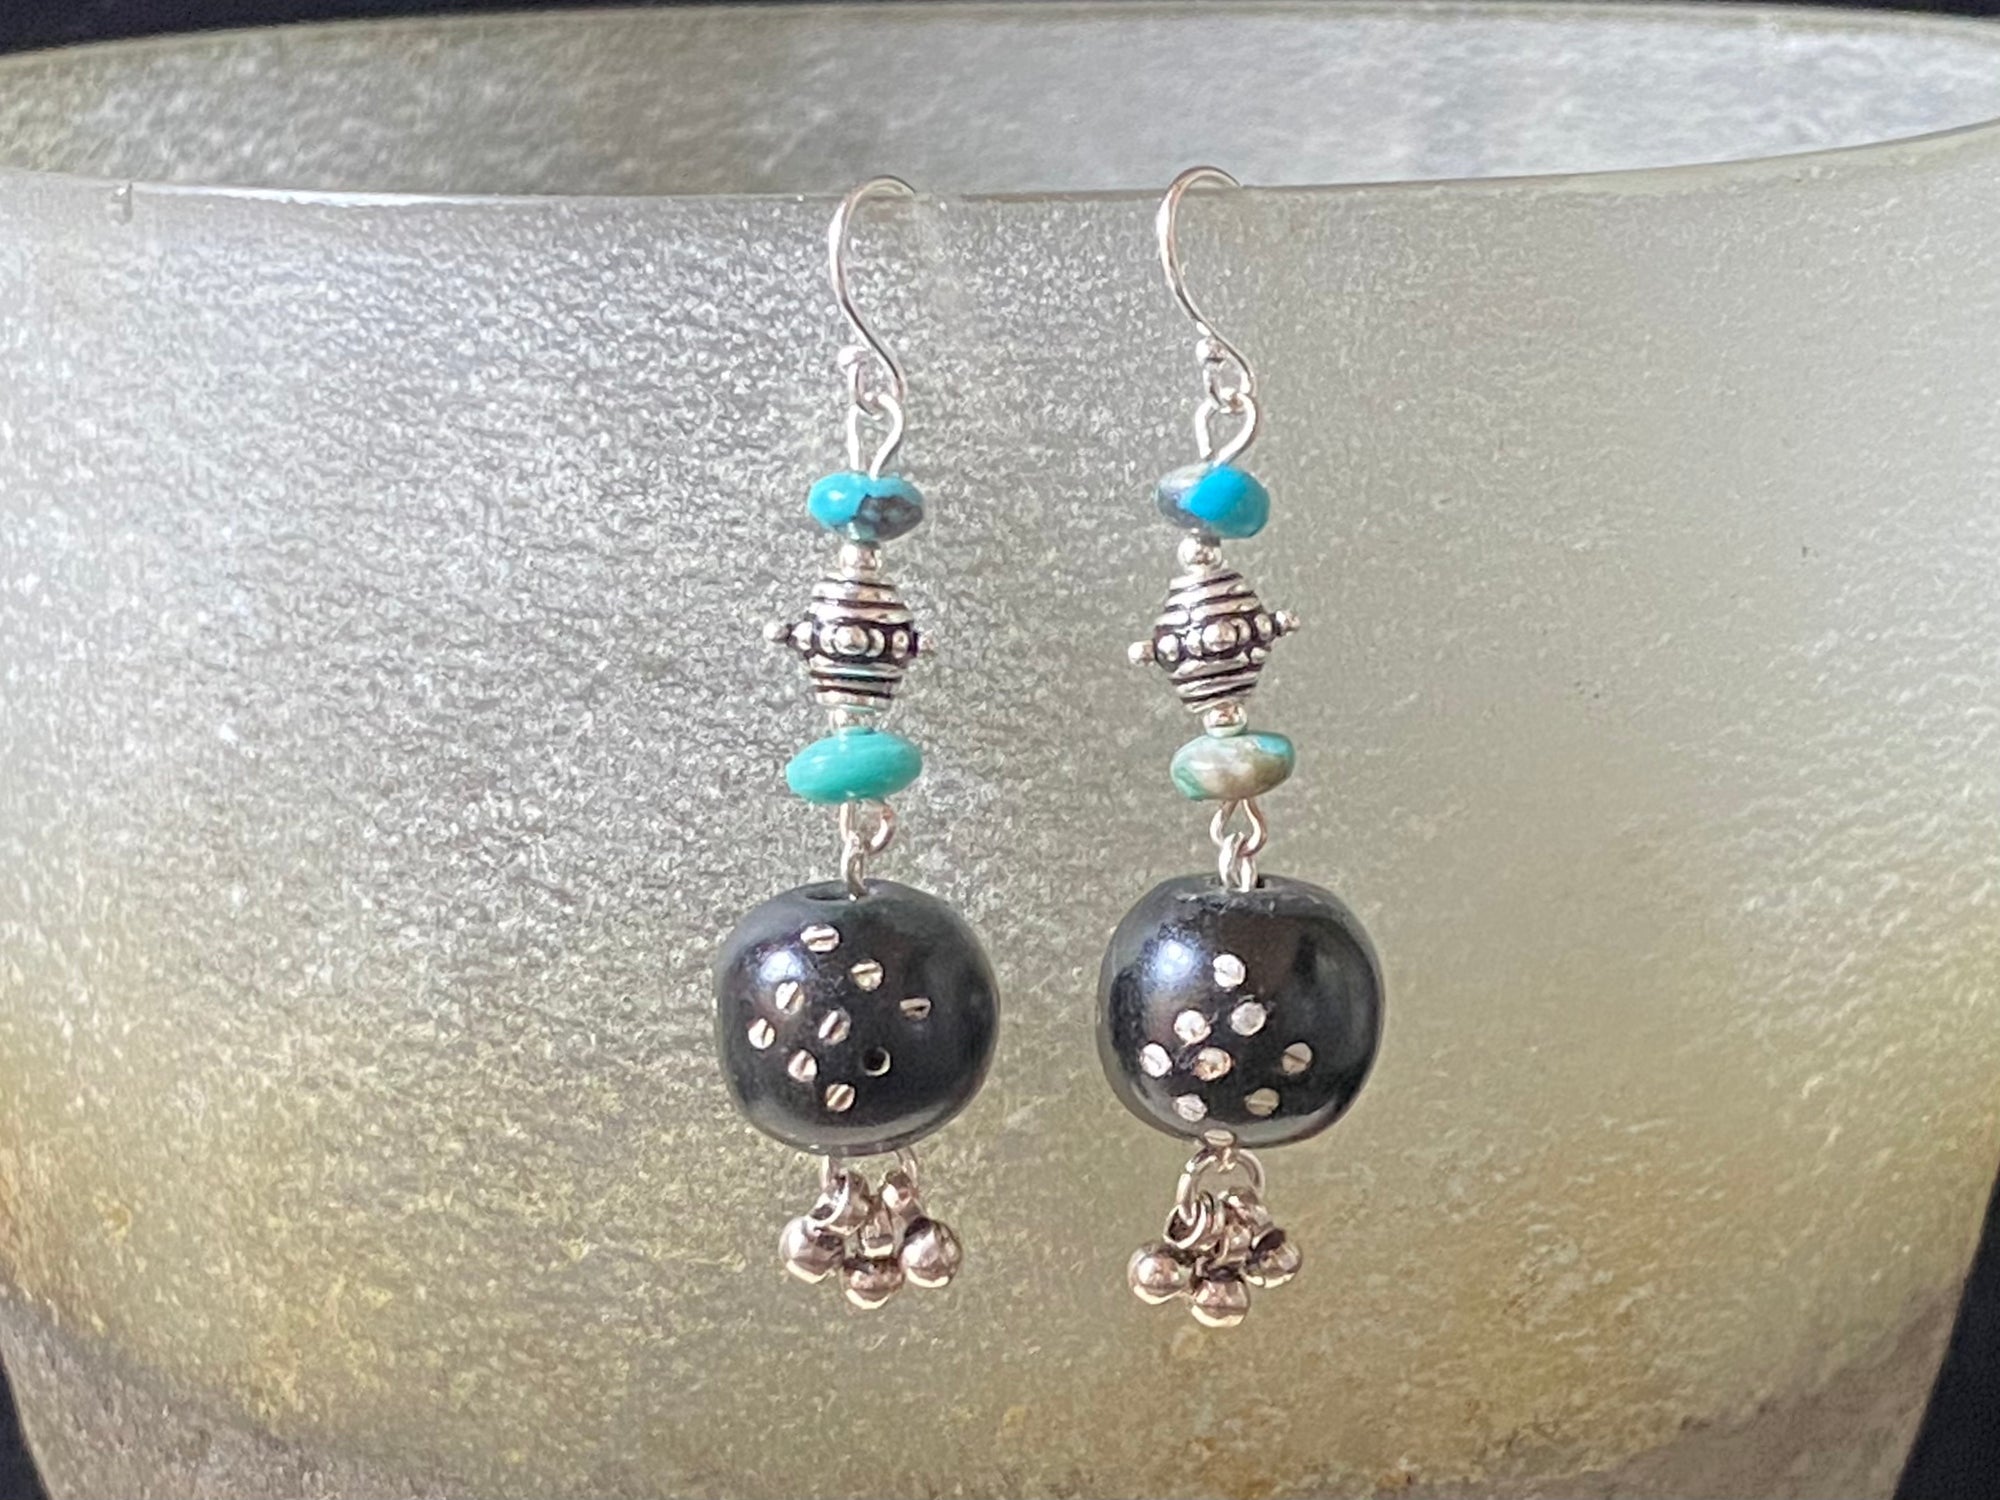 These statement earrings were created from vintage Yemeni black wood beads inlaid with silver. They are finished with Arizona turquoise and sterling silver handmade beads & hooks. A one-off earring design that's light and easy to wear. Length 5 cm including hook, and the inlay beads are approximately 12 mm in length.